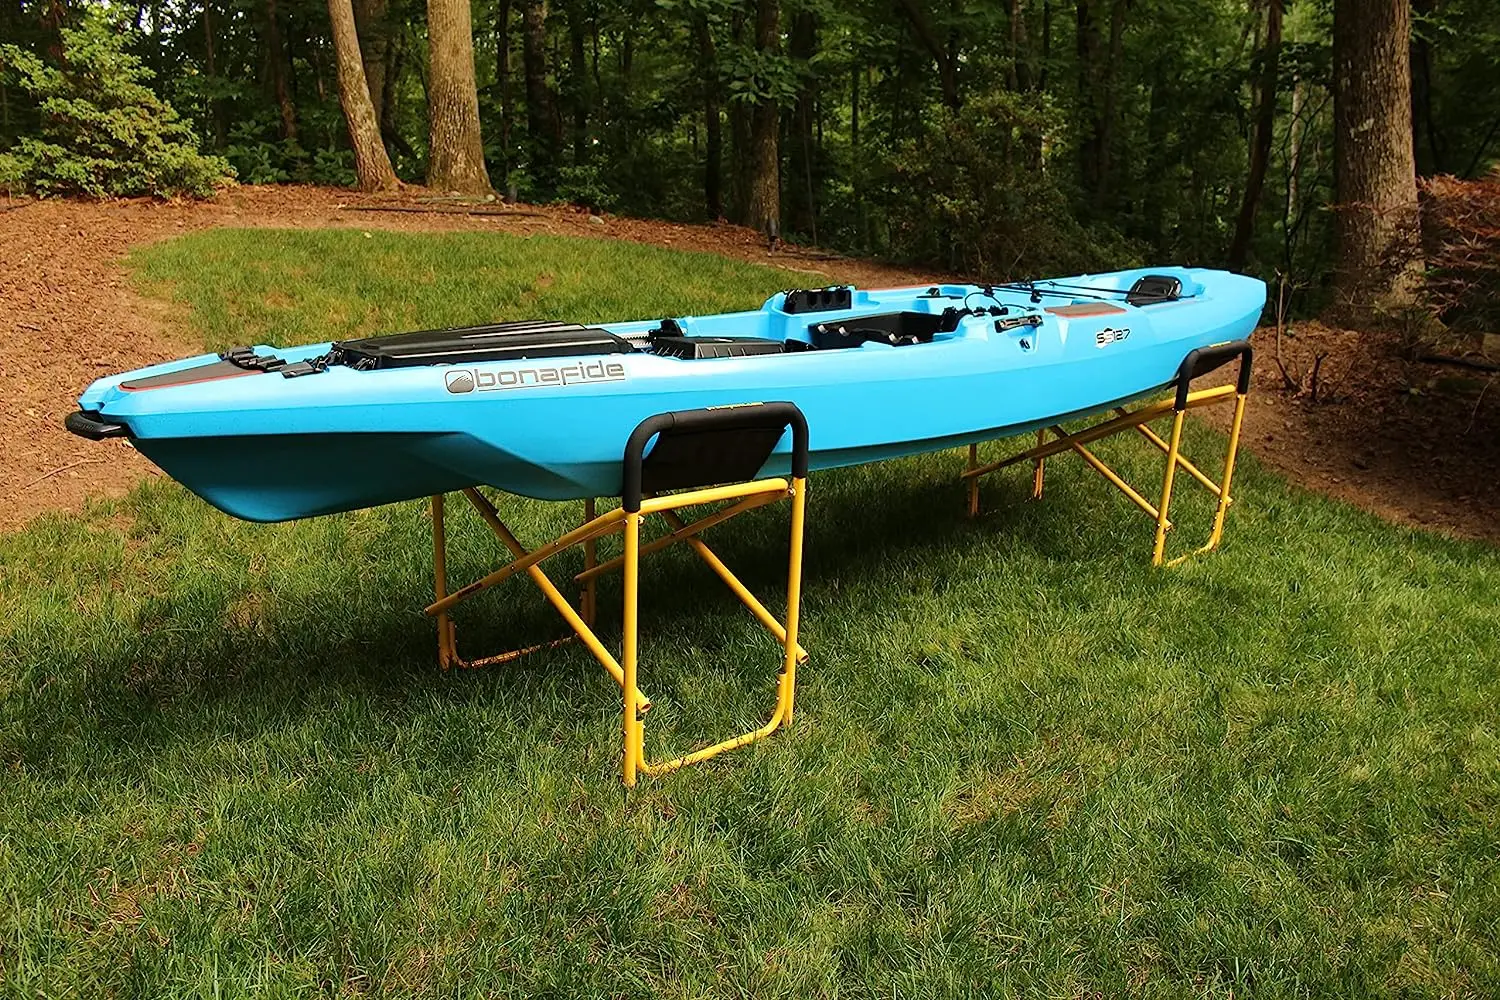 https://ae01.alicdn.com/kf/Sd5c9020ad8de47c1b3f9c03f7ea6fdabe/Boats-accessories-Kayak-accessories-fishing-Kayak-fishing-accessories-Pontoon-boat-accessories-Kayak-cover-Airbed-Sup-accessorie.jpg